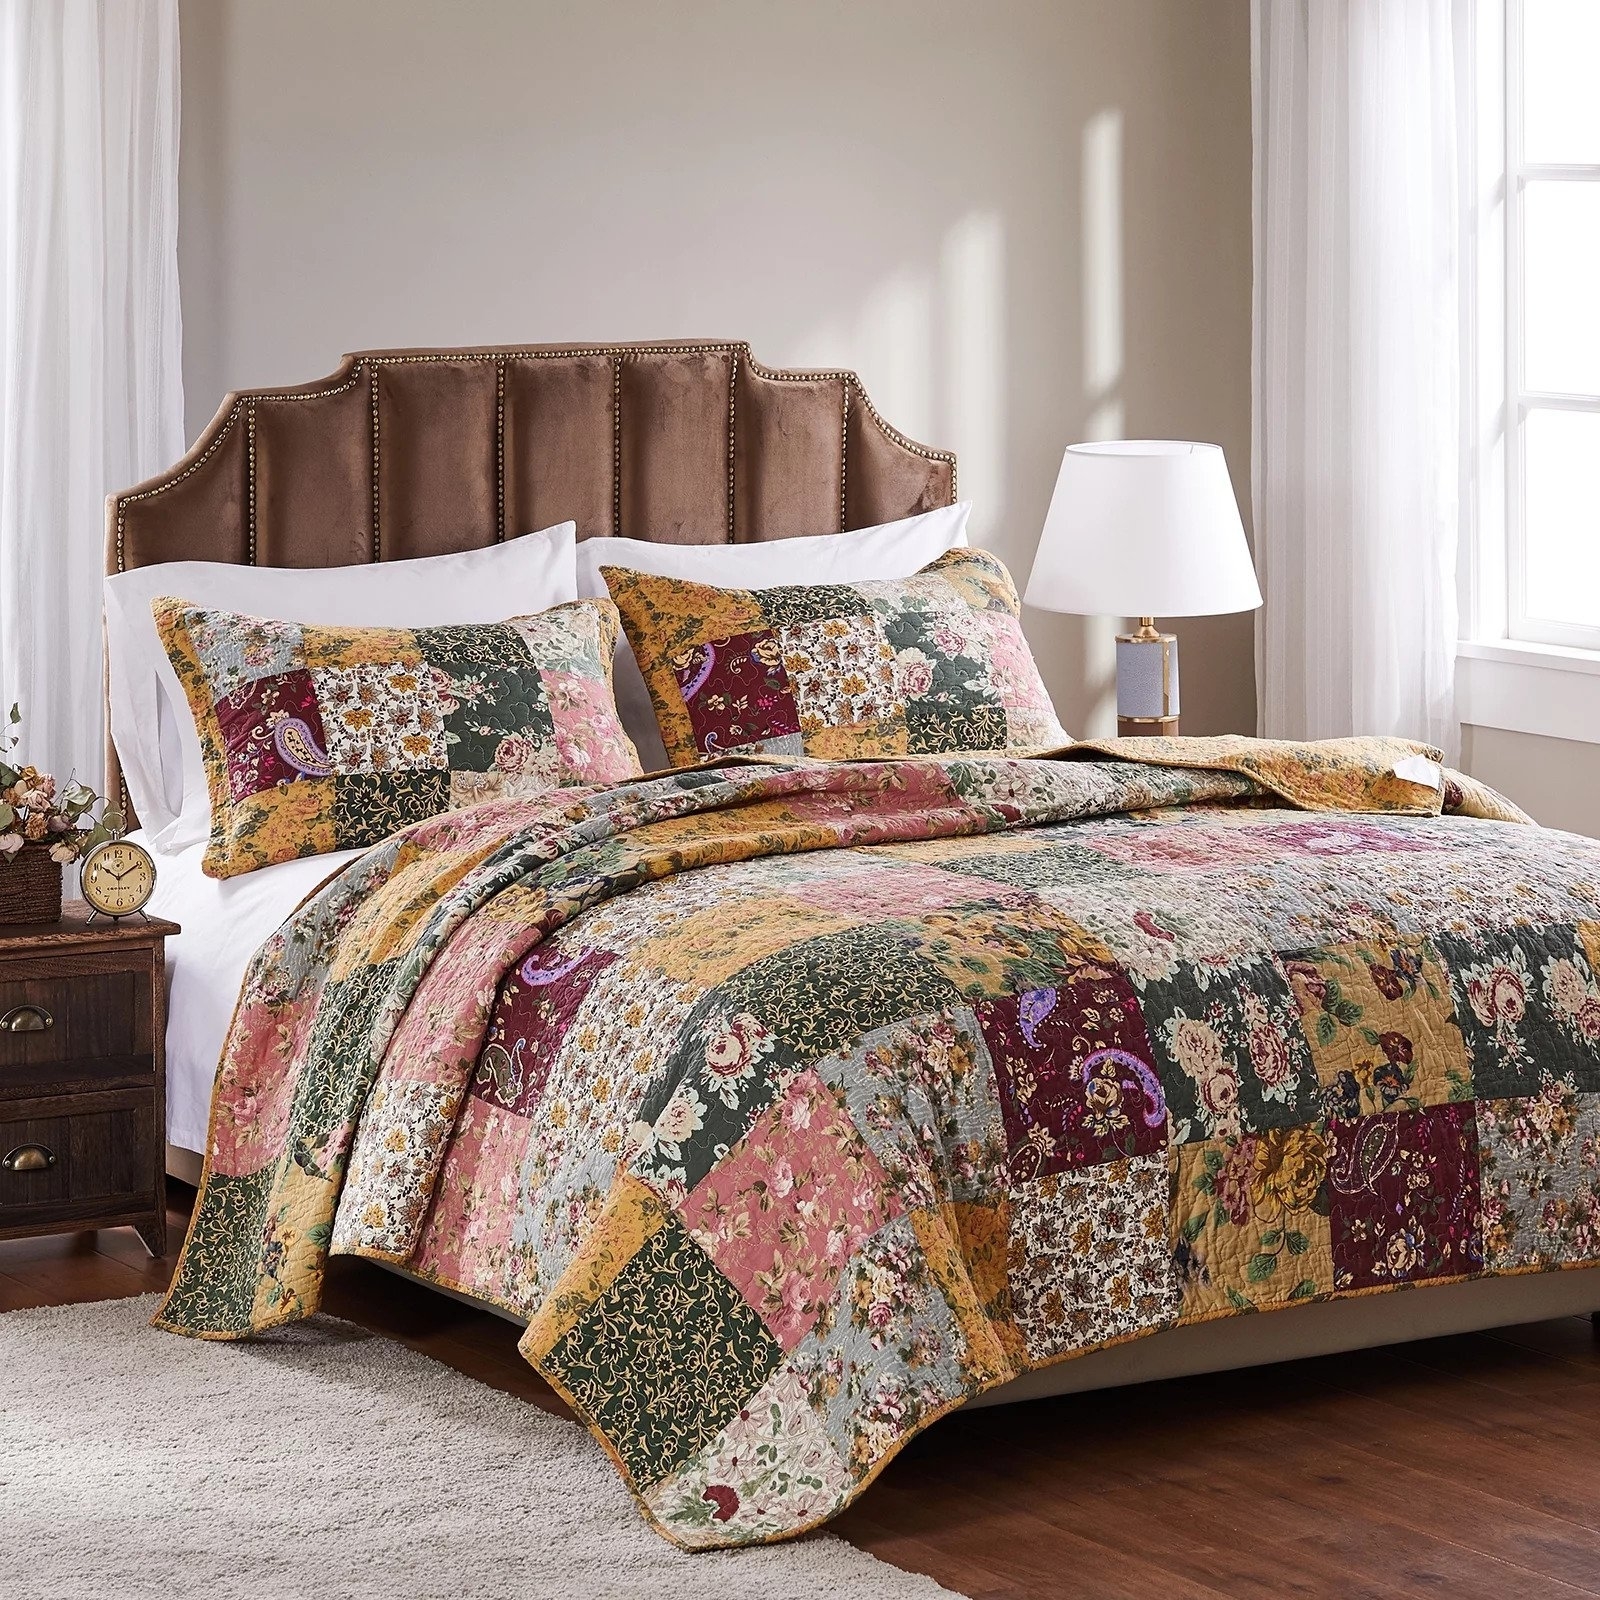 The multi-colored quilt set